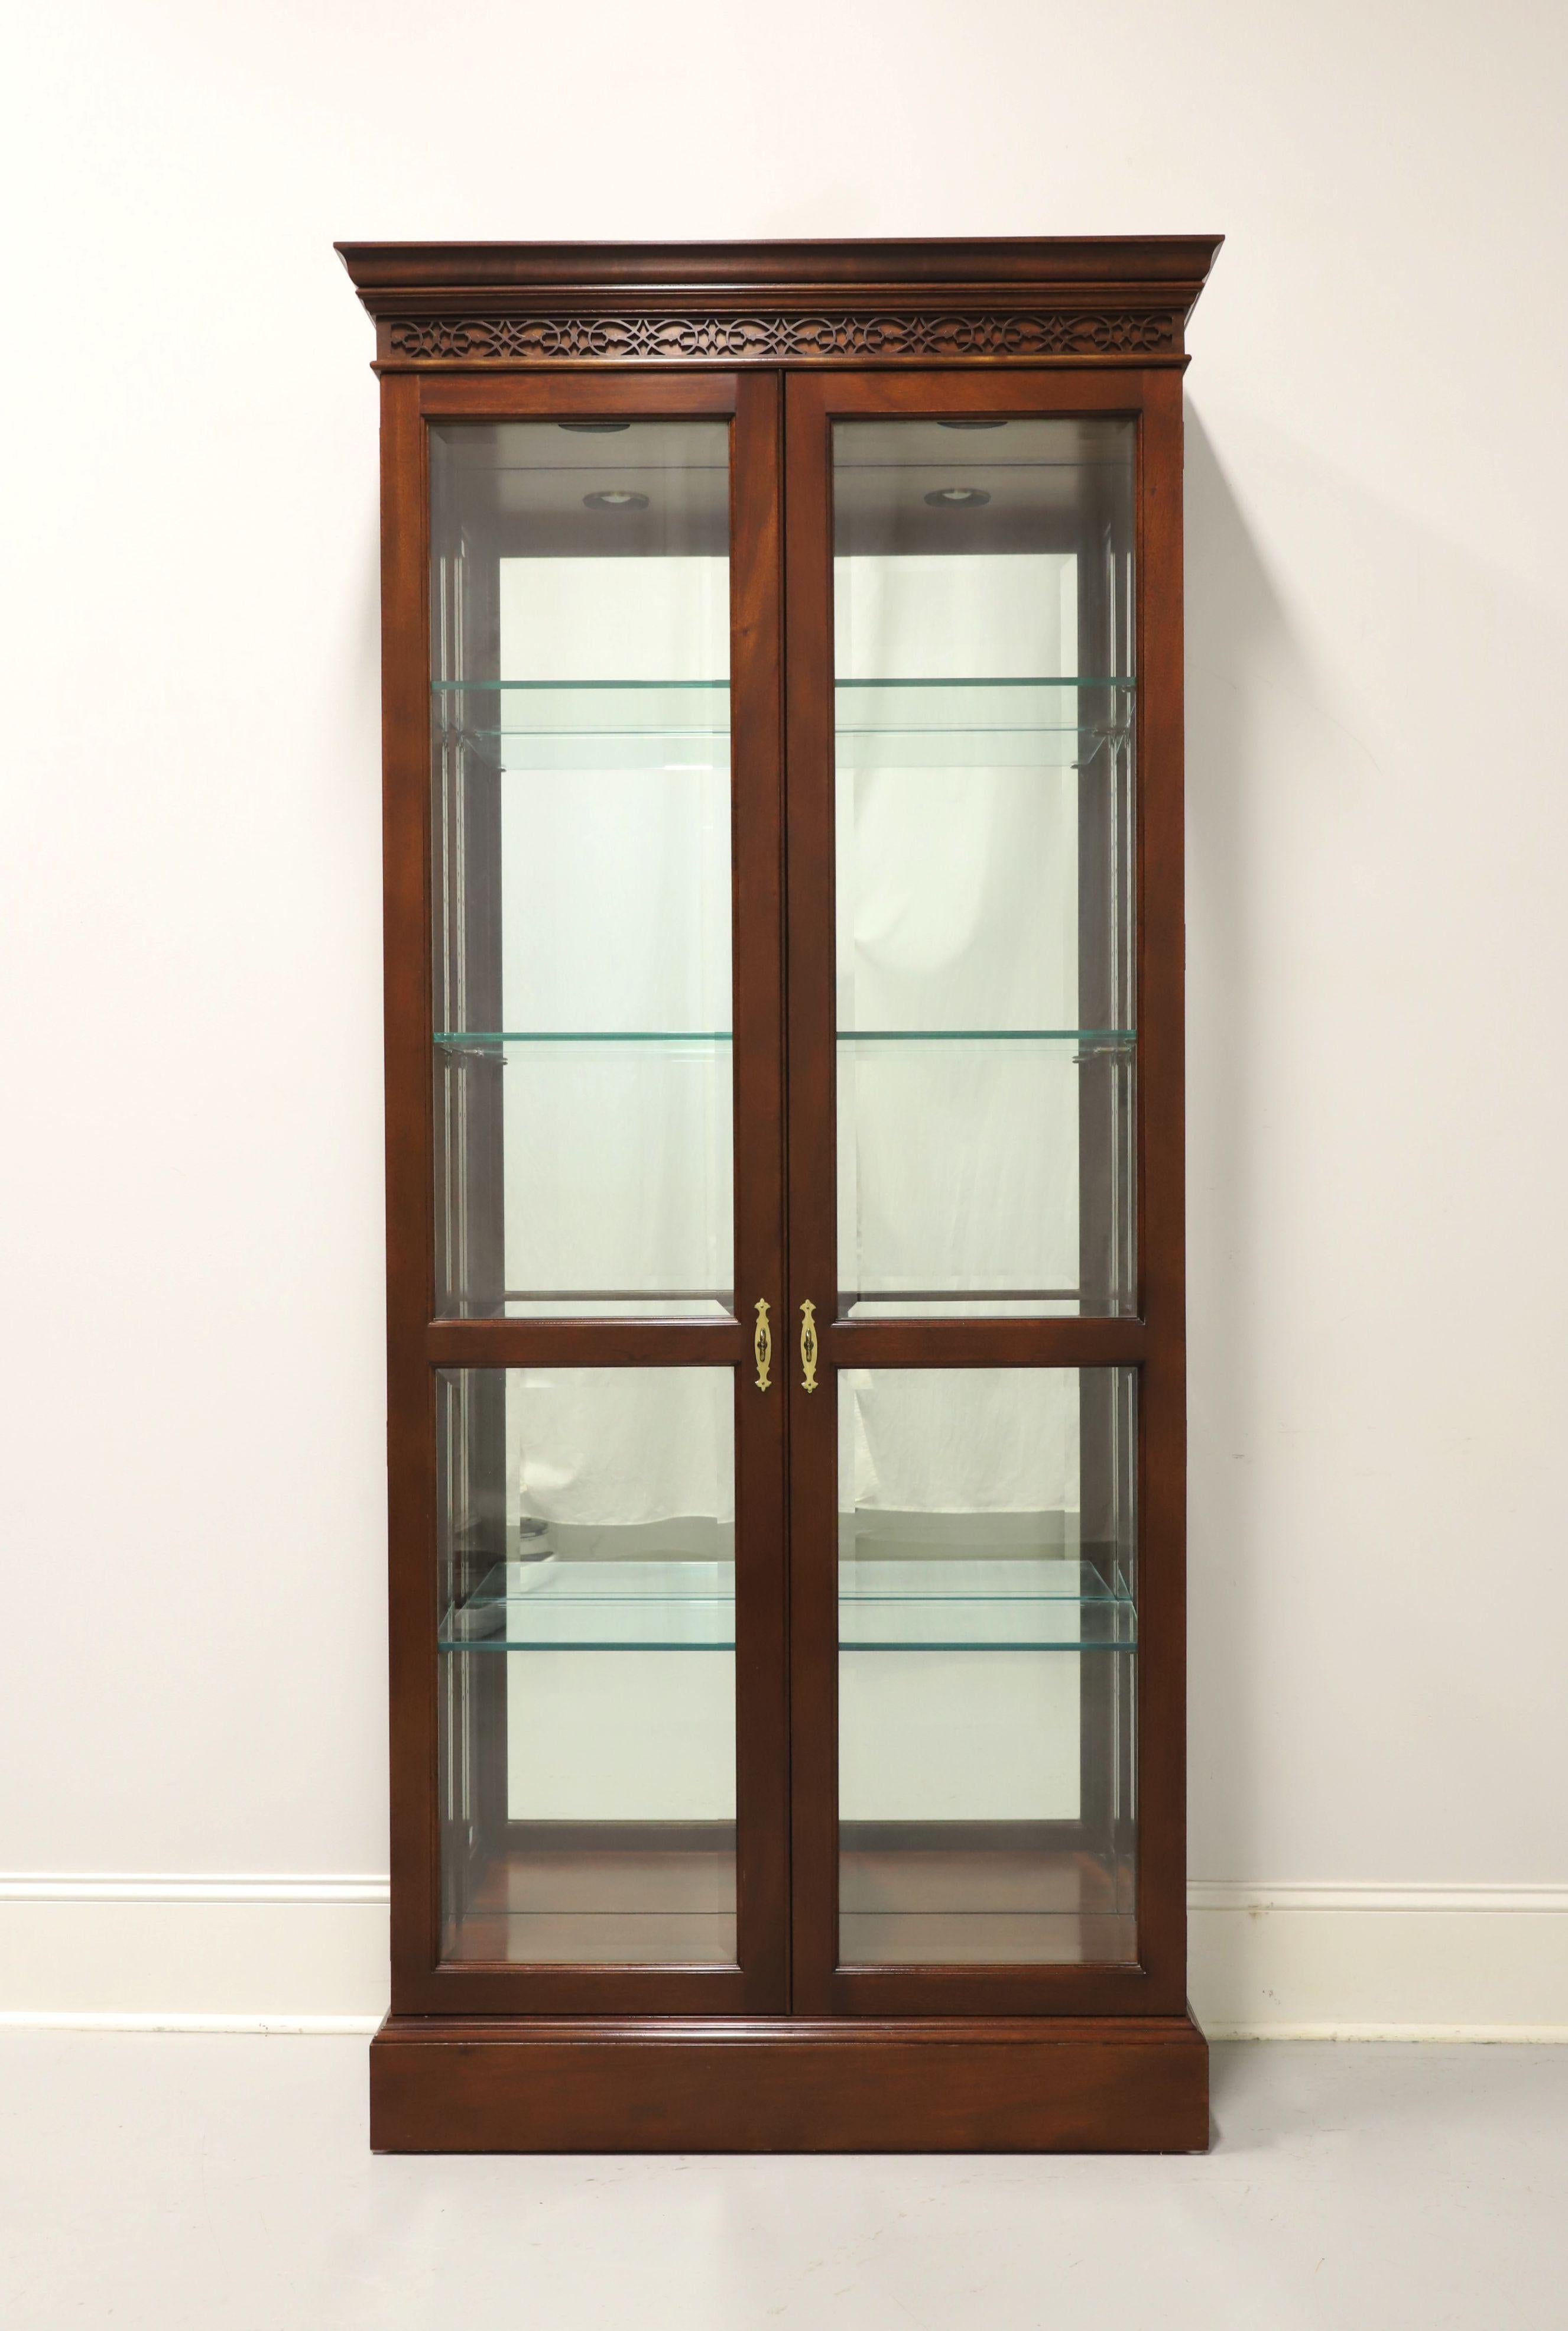 A Chippendale style curio display cabinet by Stickley Furniture. Solid mahogany with brass hardware, decorative fretwork to frieze at top, beveled glass dual doors and beveled side panels. Lighted cabinet features a mirrored back, a fixed center